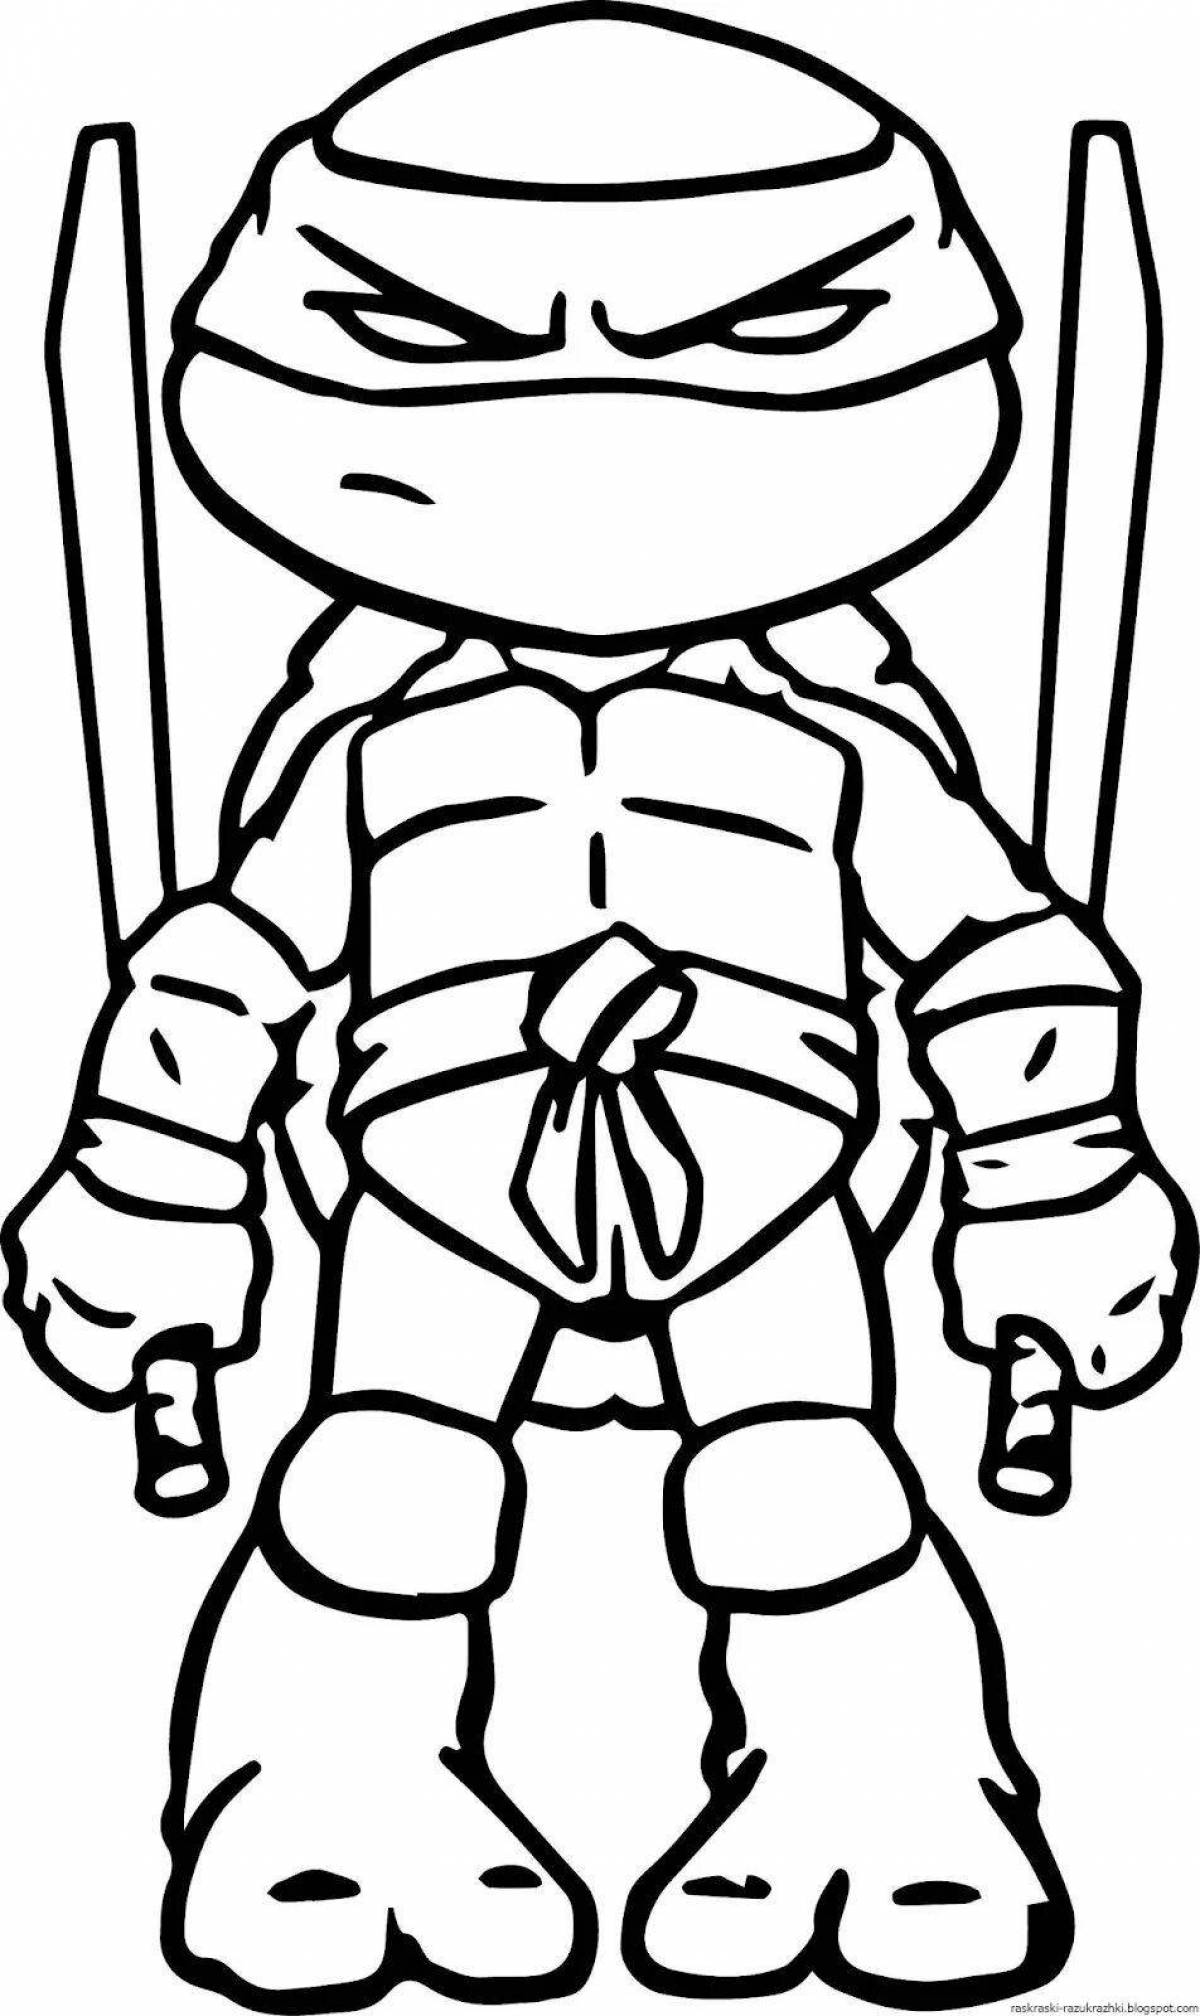 Fantastic Teenage Mutant Ninja Turtles coloring pages for 5 year olds